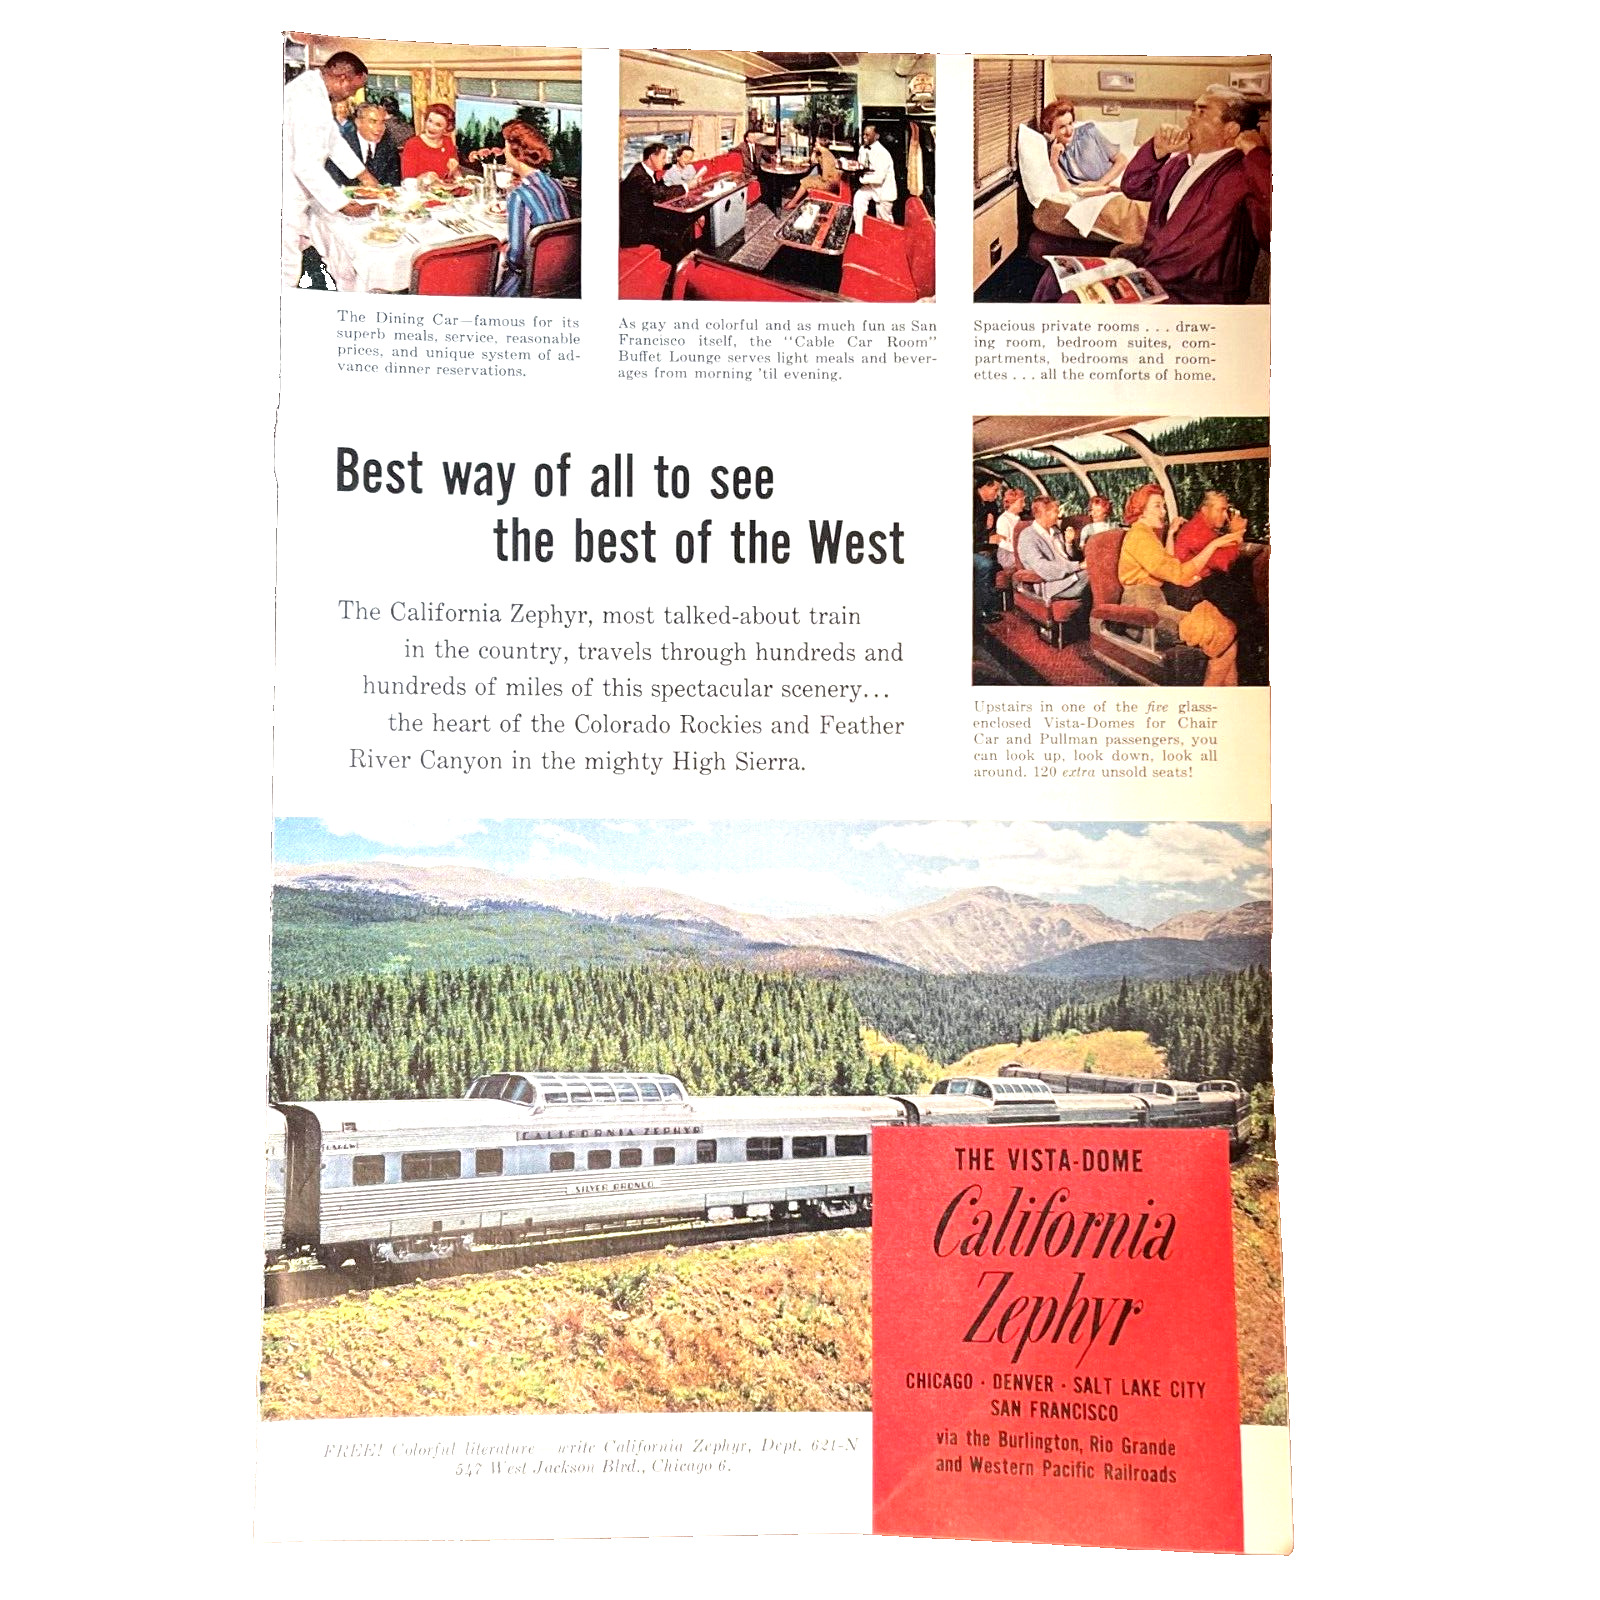 The Vista Dome California Zephyr See the Best of the West Advertisement 1962